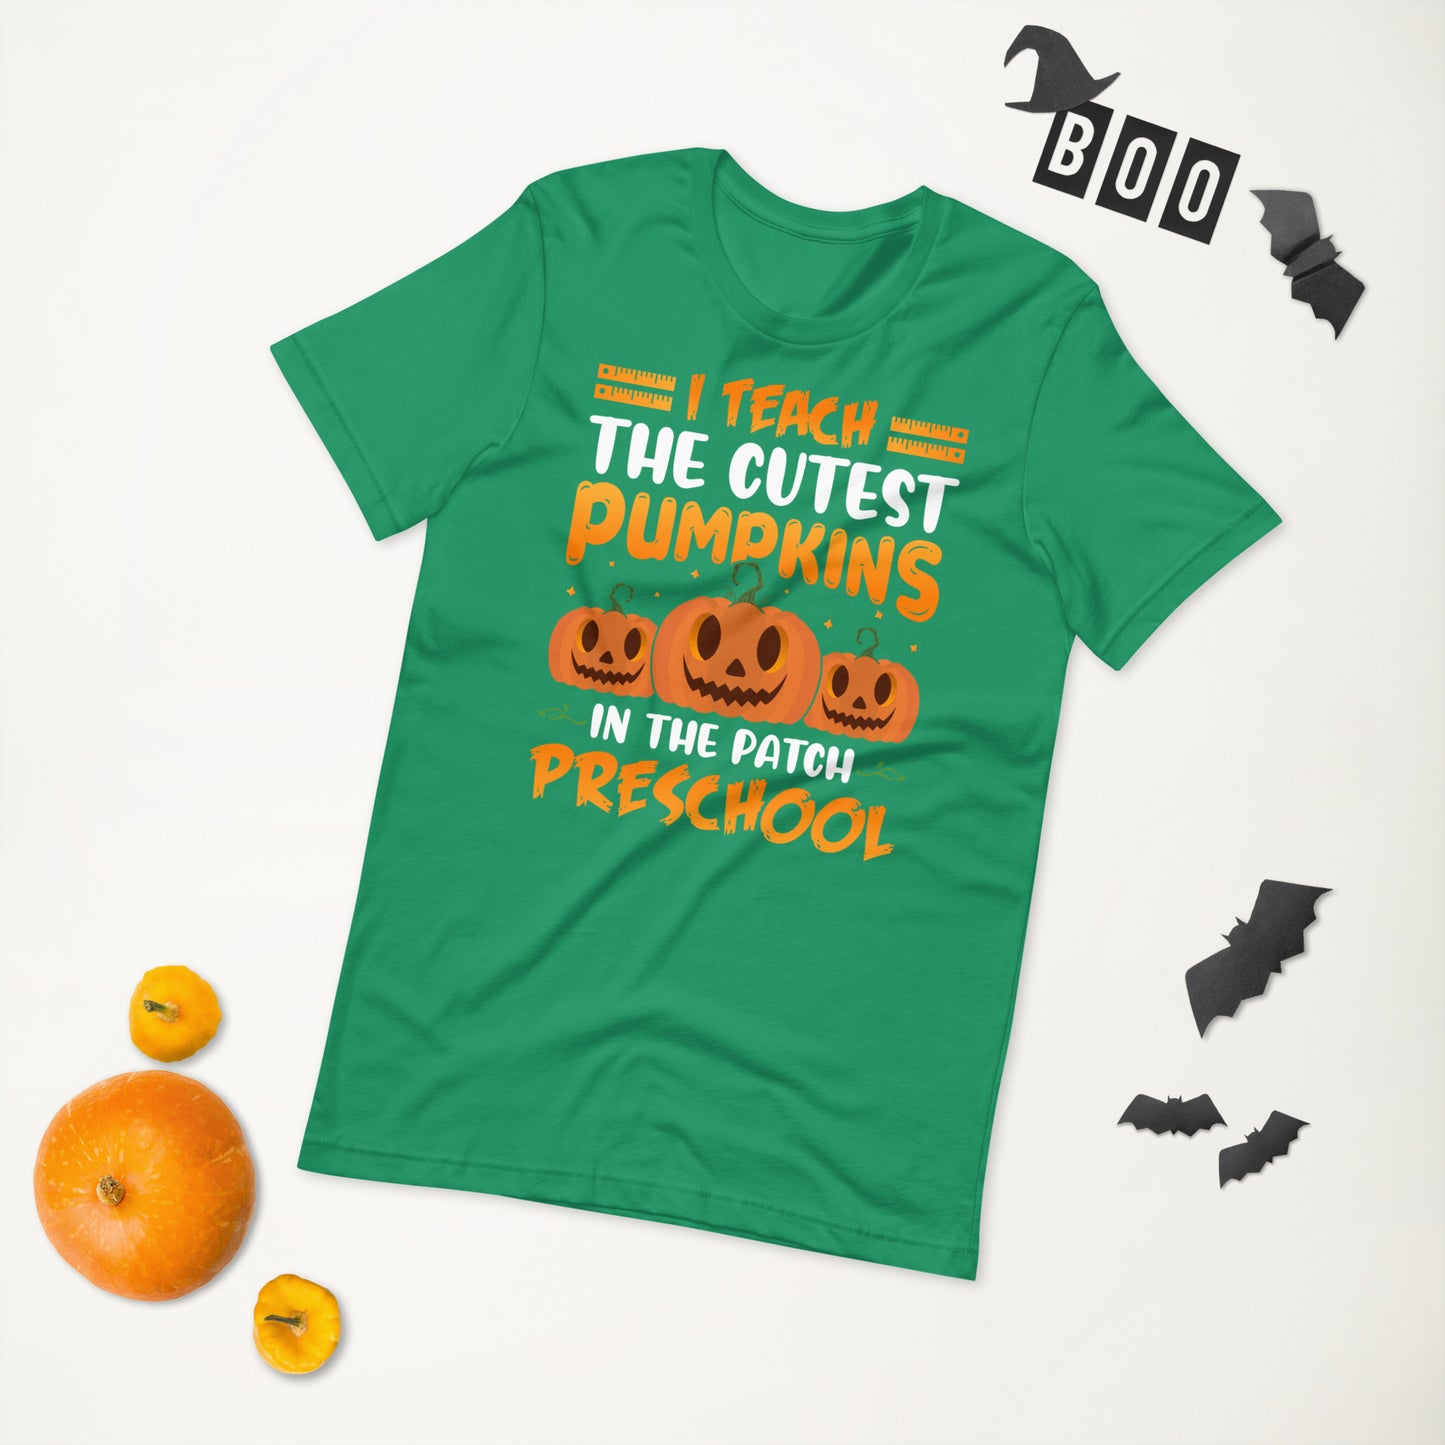 "I Teach the Cutest Pumpkins in the Patch" Unisex T-shirt